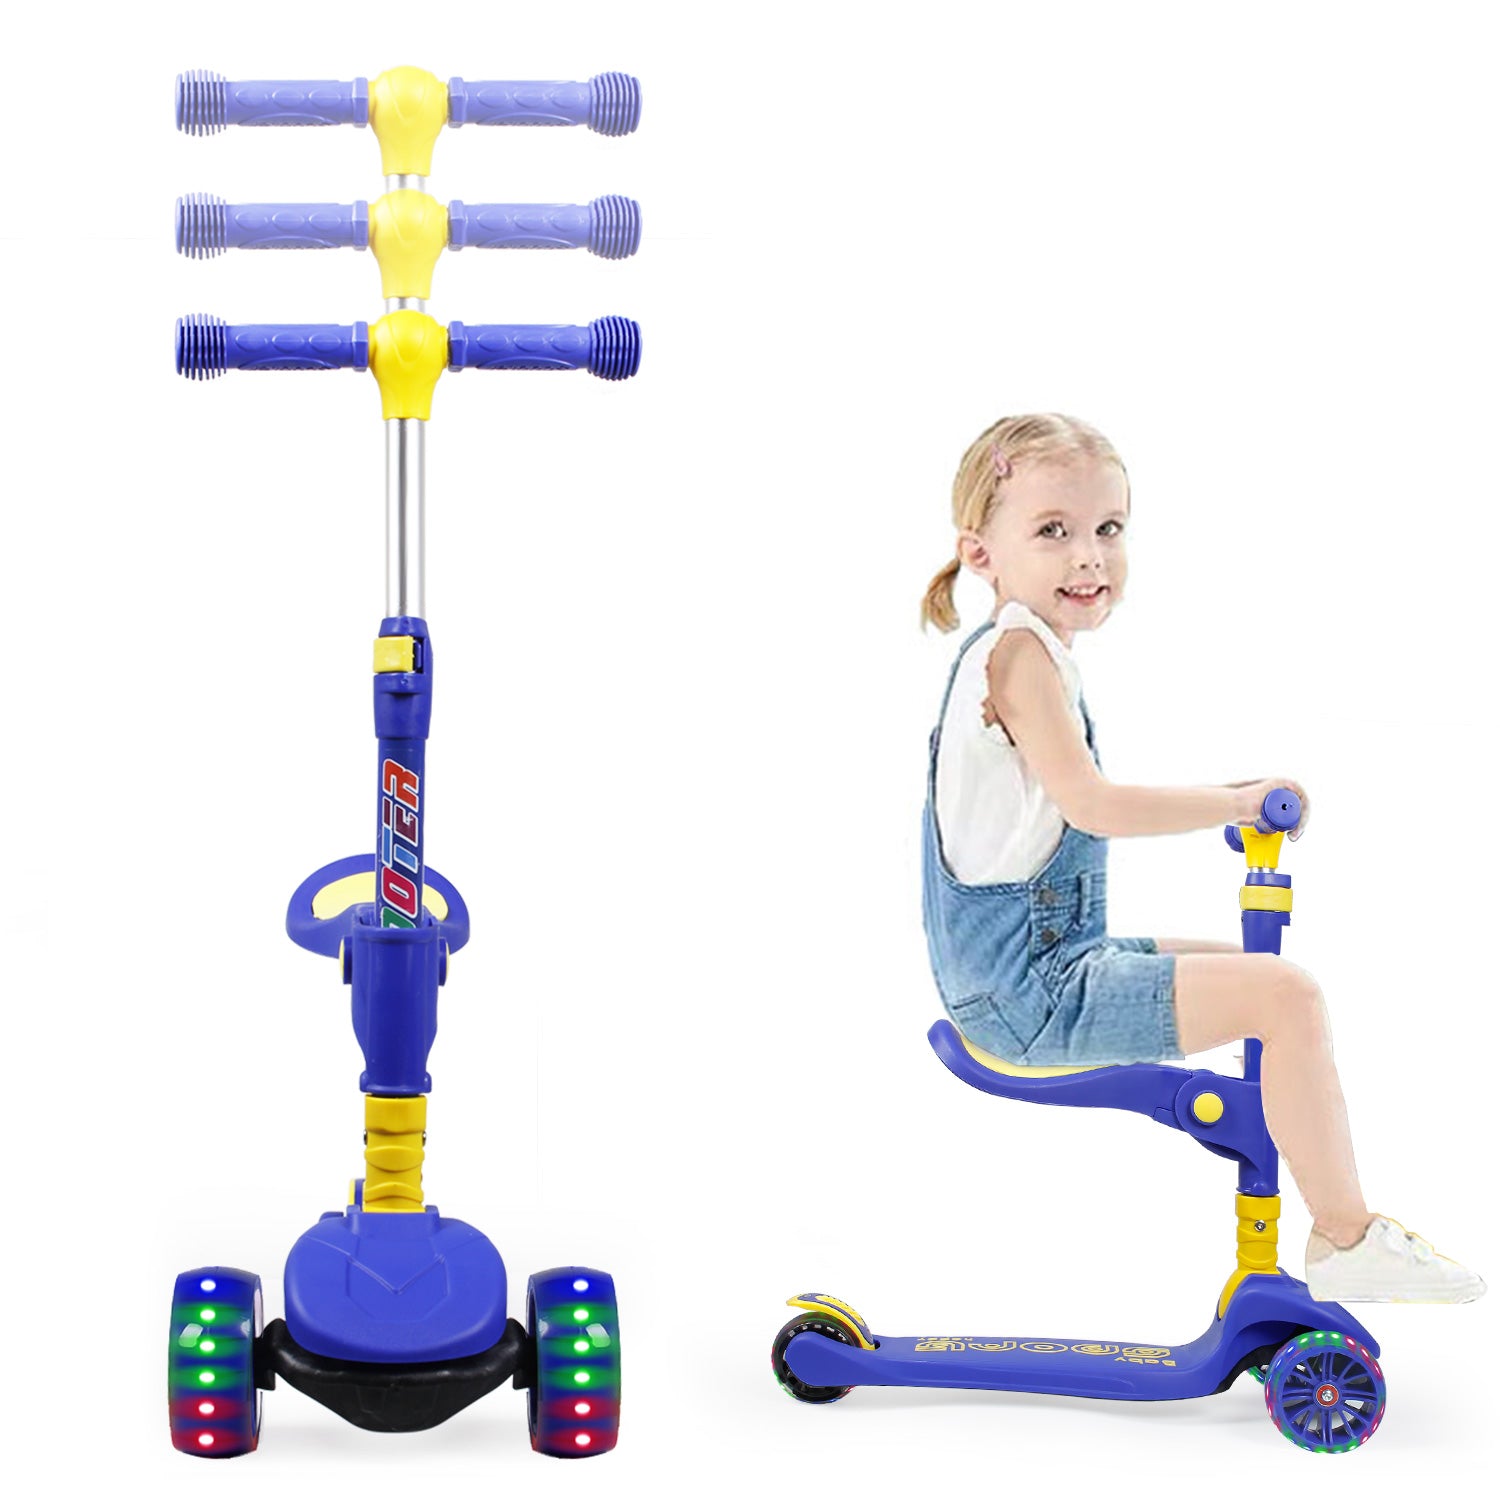 SISIGAD 301 Kick Scooter for Kids w/Seat (4 Colors)